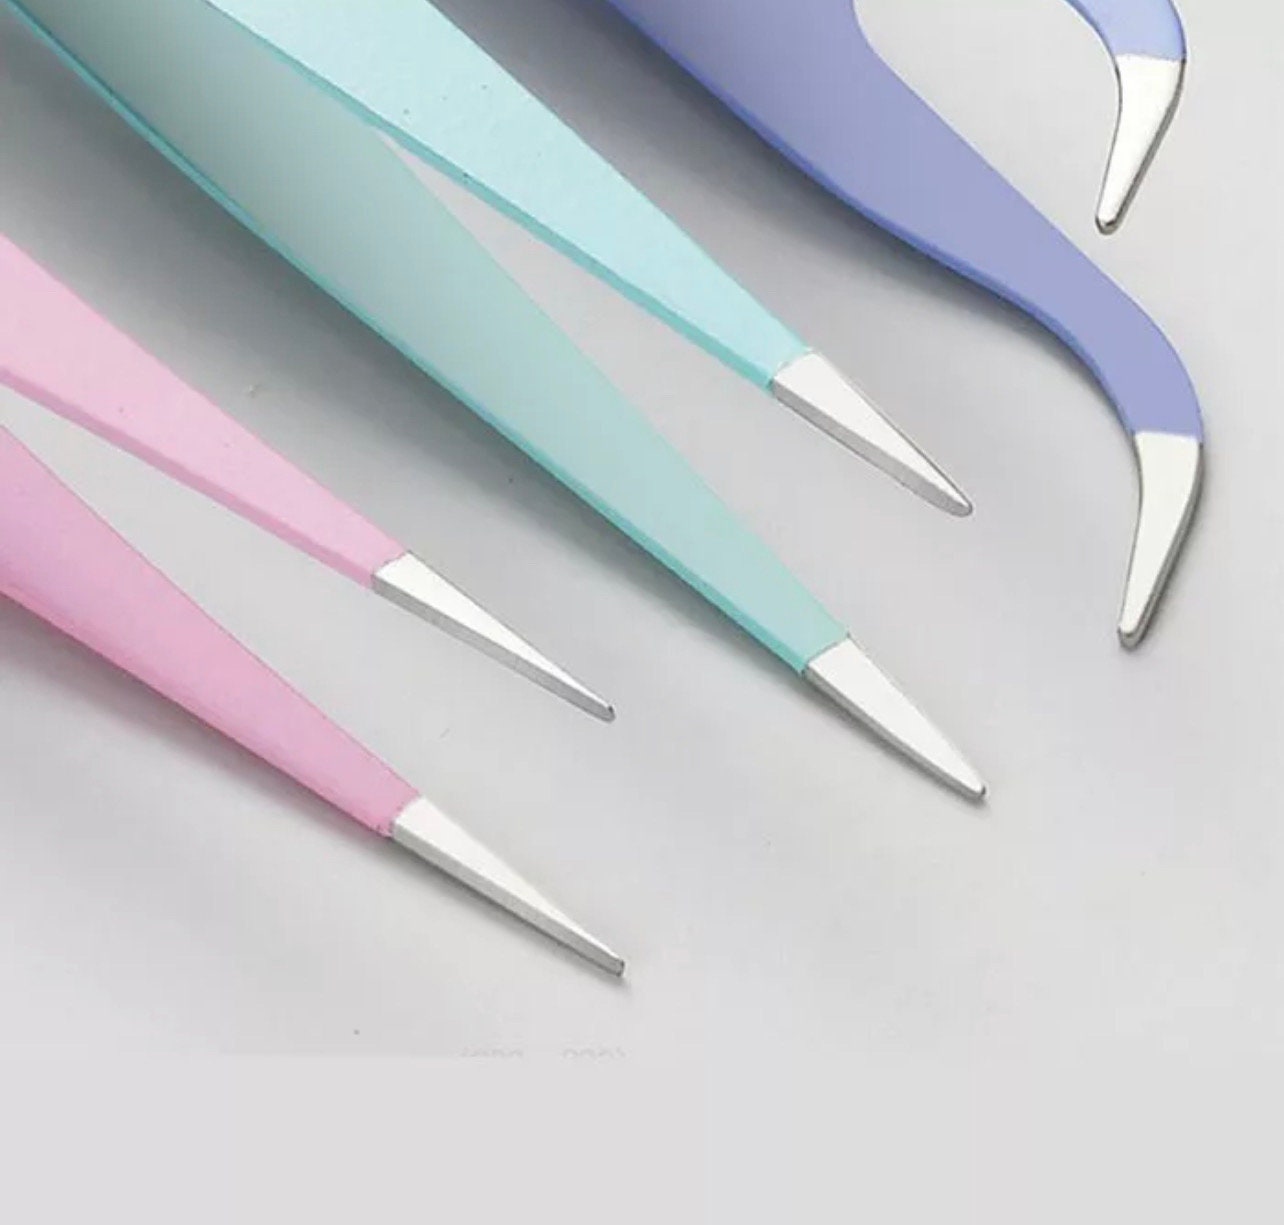  HARFINGTON 5pcs Sticker Tweezers for Crafting 4.53 Curved Tip  with Spring Plastic Tweezers Craft Tweezers for Stickers, Scrapbooking,  Eyelash Extensions, White : Beauty & Personal Care